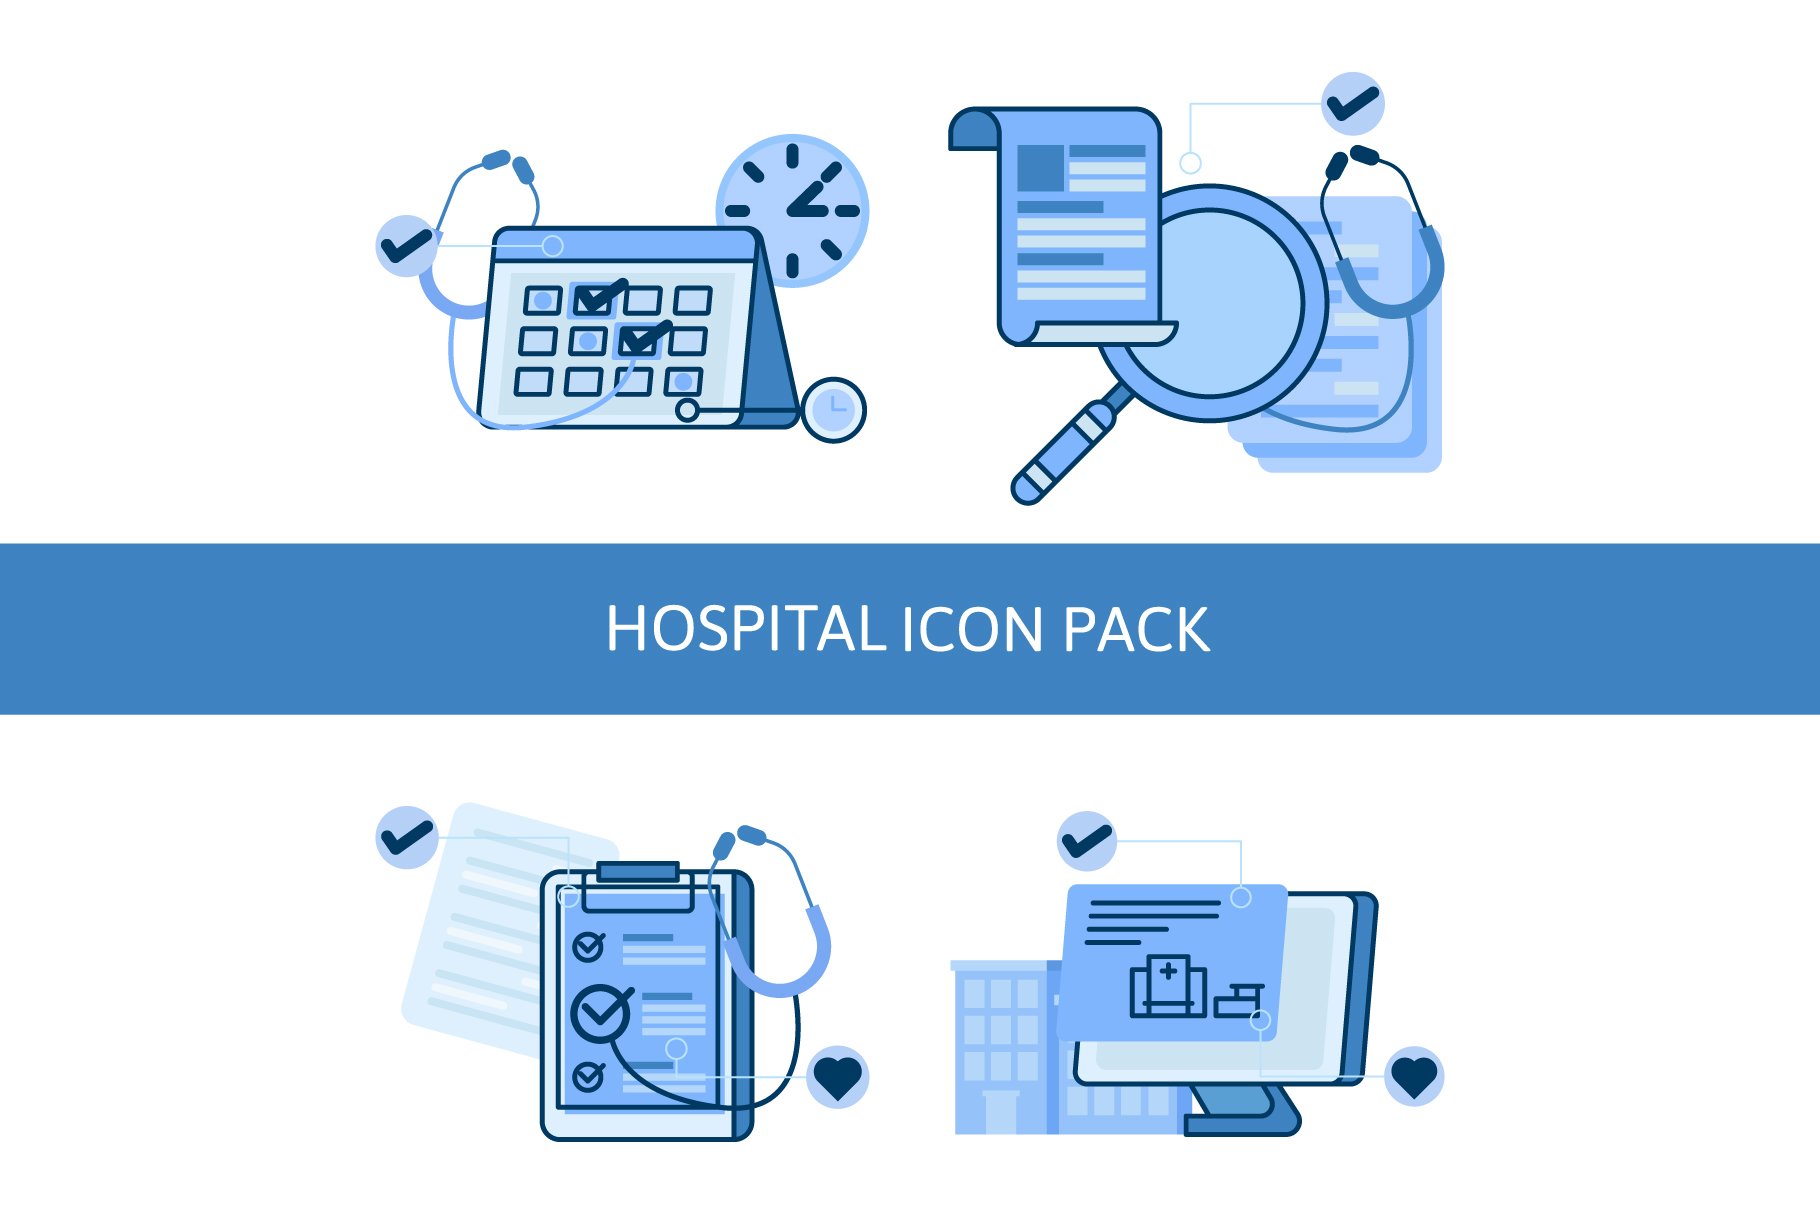 Hospital Icon Pack cover image.